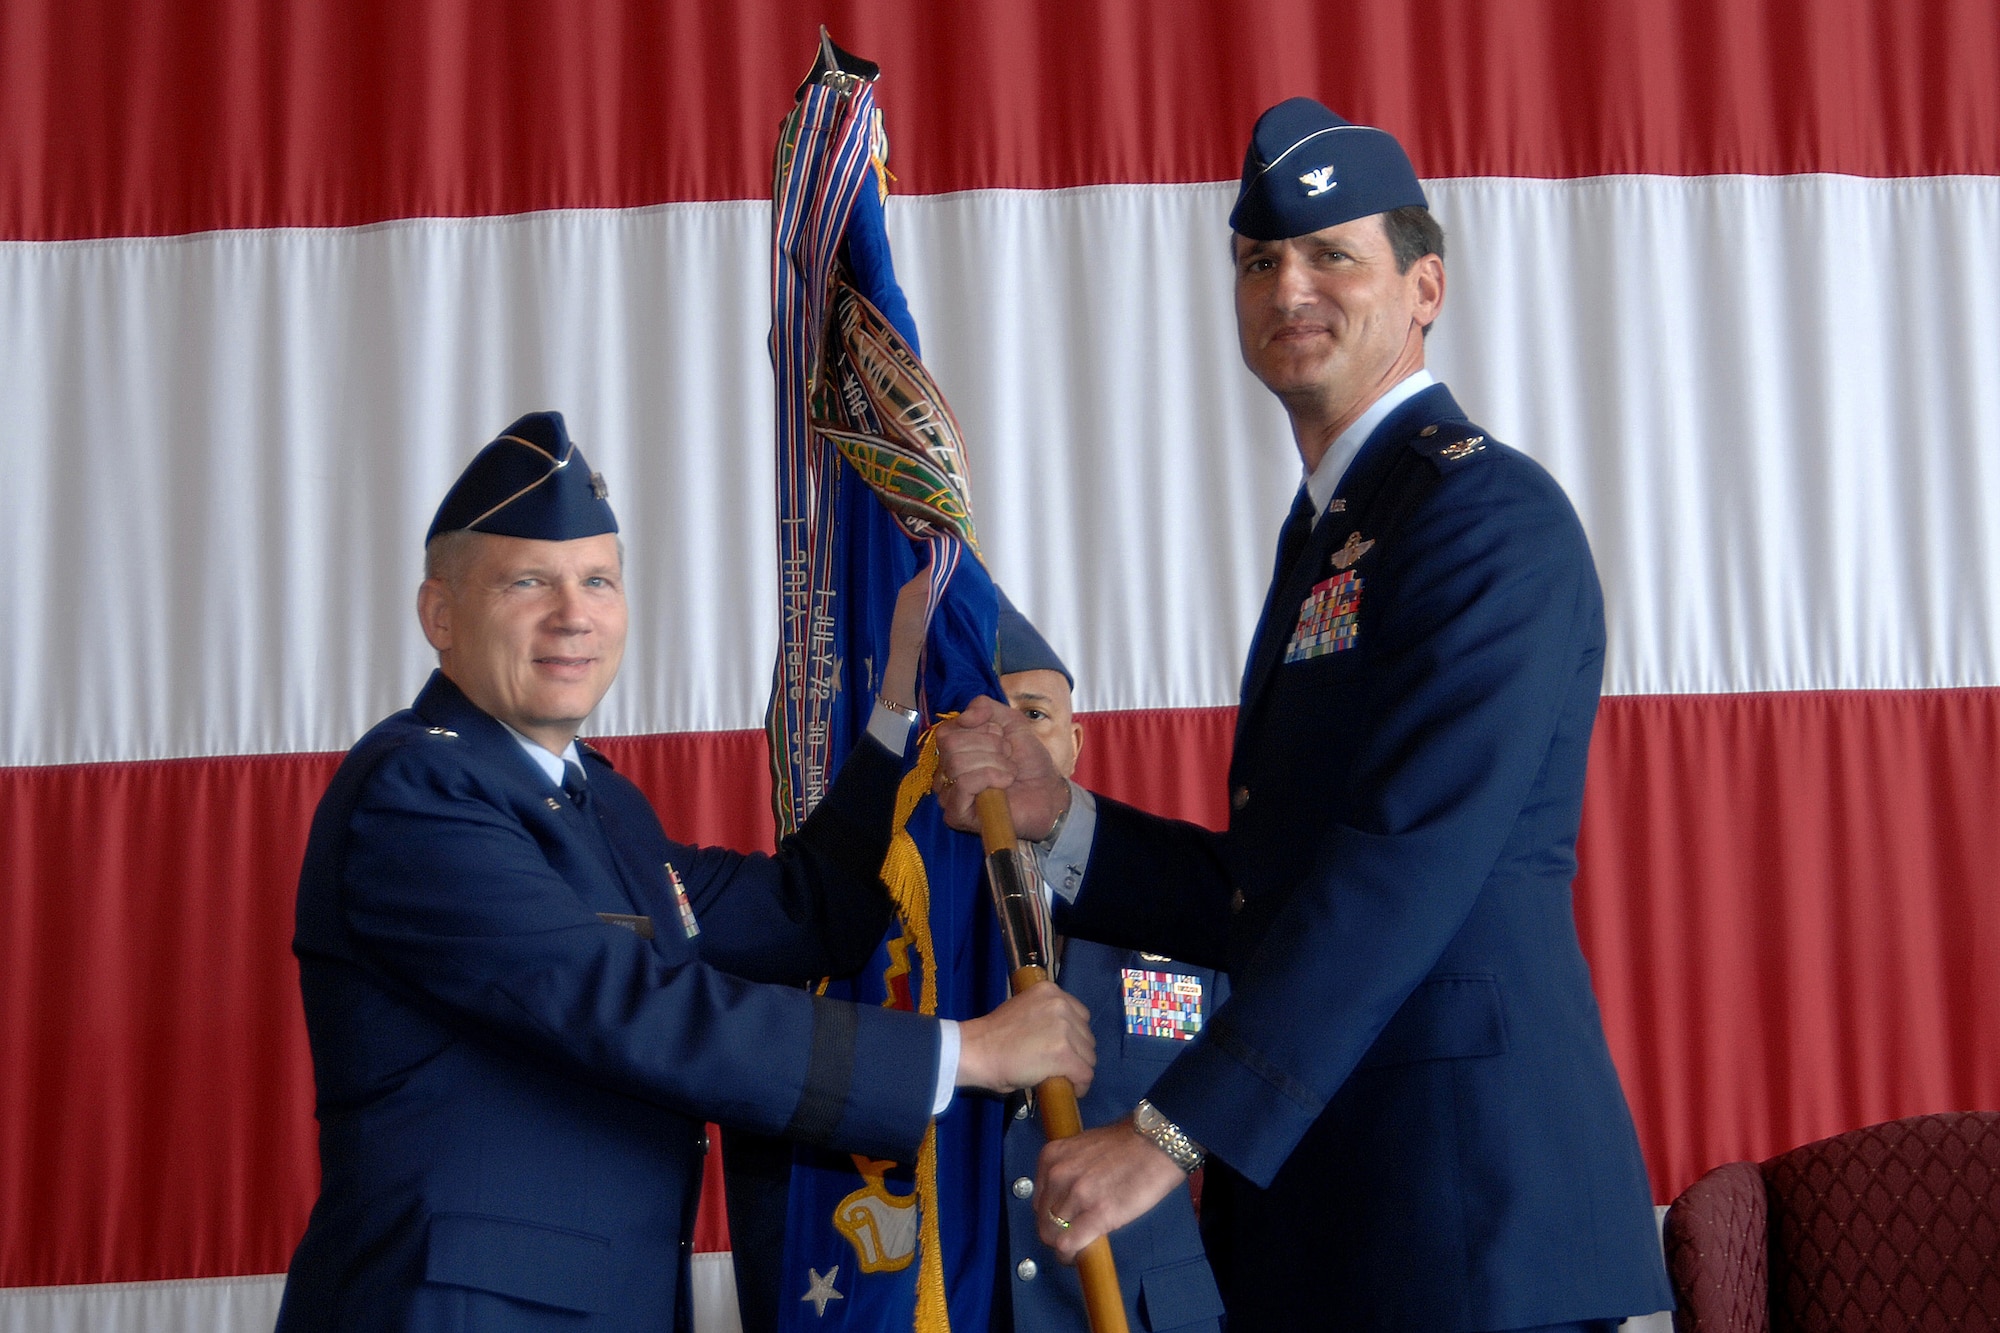 OFFUTT AIR FORCE BASE, Neb. -- The new 55th Wing Commander Colonel Jim Jones (right) accepts the wing’s guidon from Eighth Air Force Commander Lt. Gen. Robert Elder Jr. during a wing change of command ceremony Wednesday at the Bennie Davis Maintenance Facility. Colonel Jones is a command pilot with more than 2,700 flying hours. The colonel’s last assignment was commander of the 116th Air Control Wing at Robins AFB, Ga. As commander of the 116th ACW, Colonel Jones was responsible for the world-wide employment of the E-8C Joint Surveillance Target Attack Radar System aircraft. (Air Force Photo by Will Hoy)
